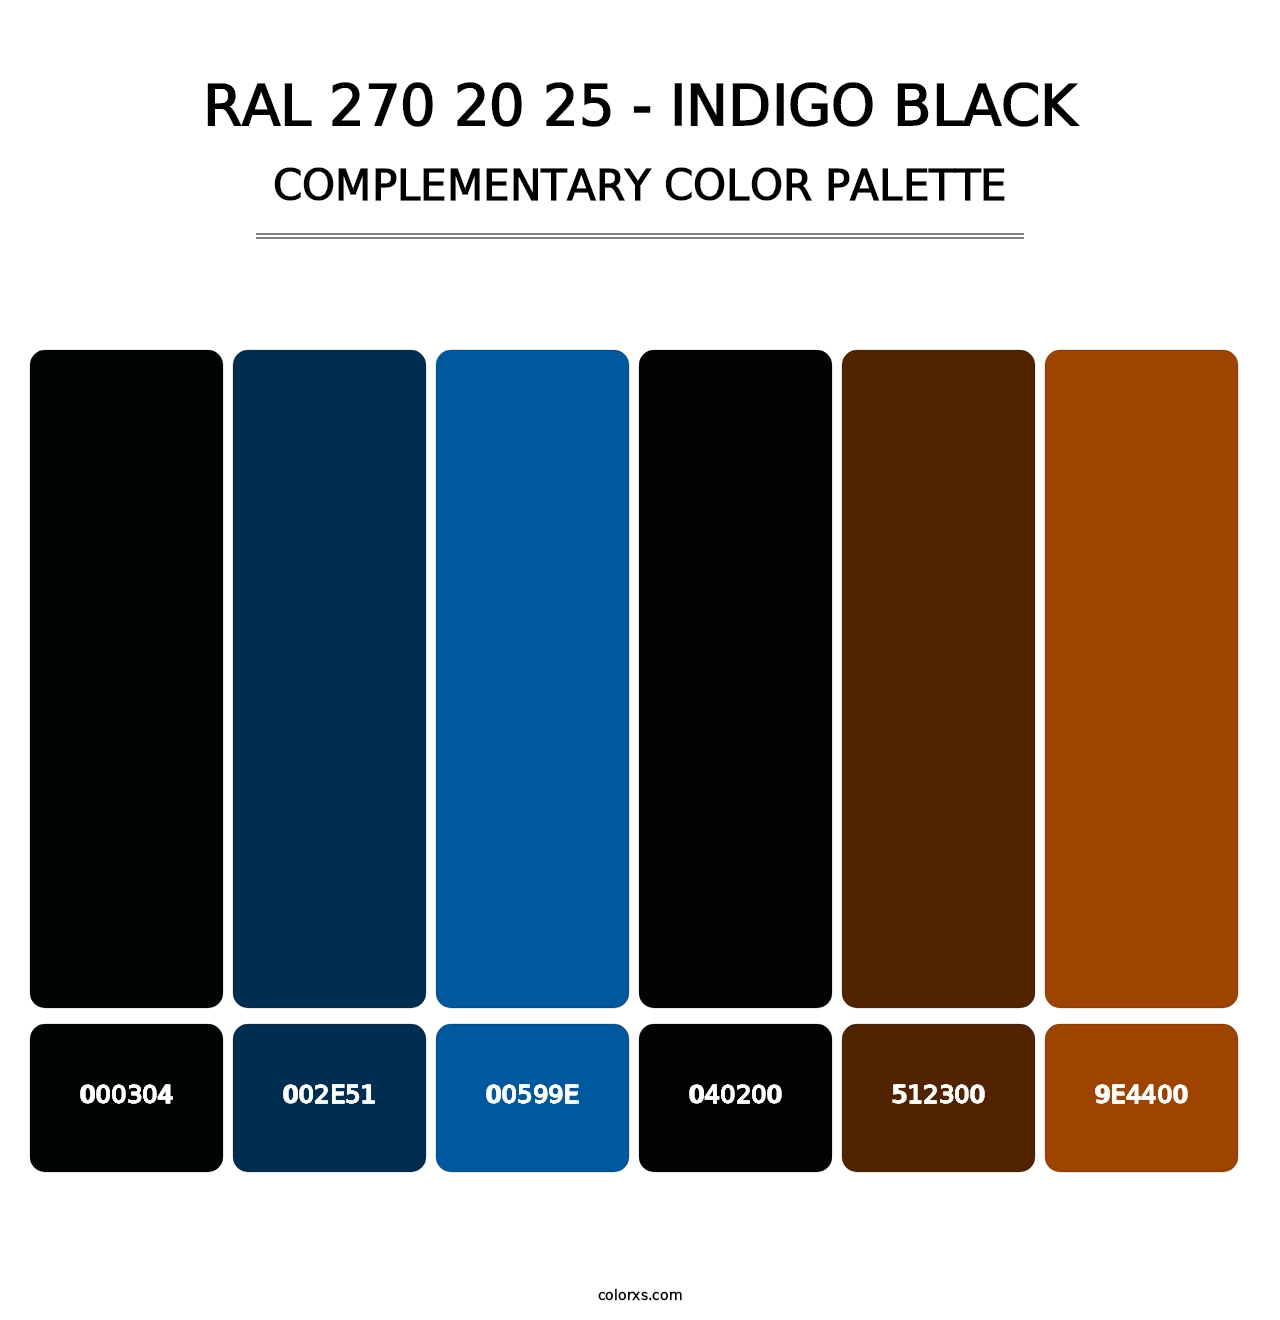 RAL 270 20 25 - Indigo Black - Complementary Color Palette